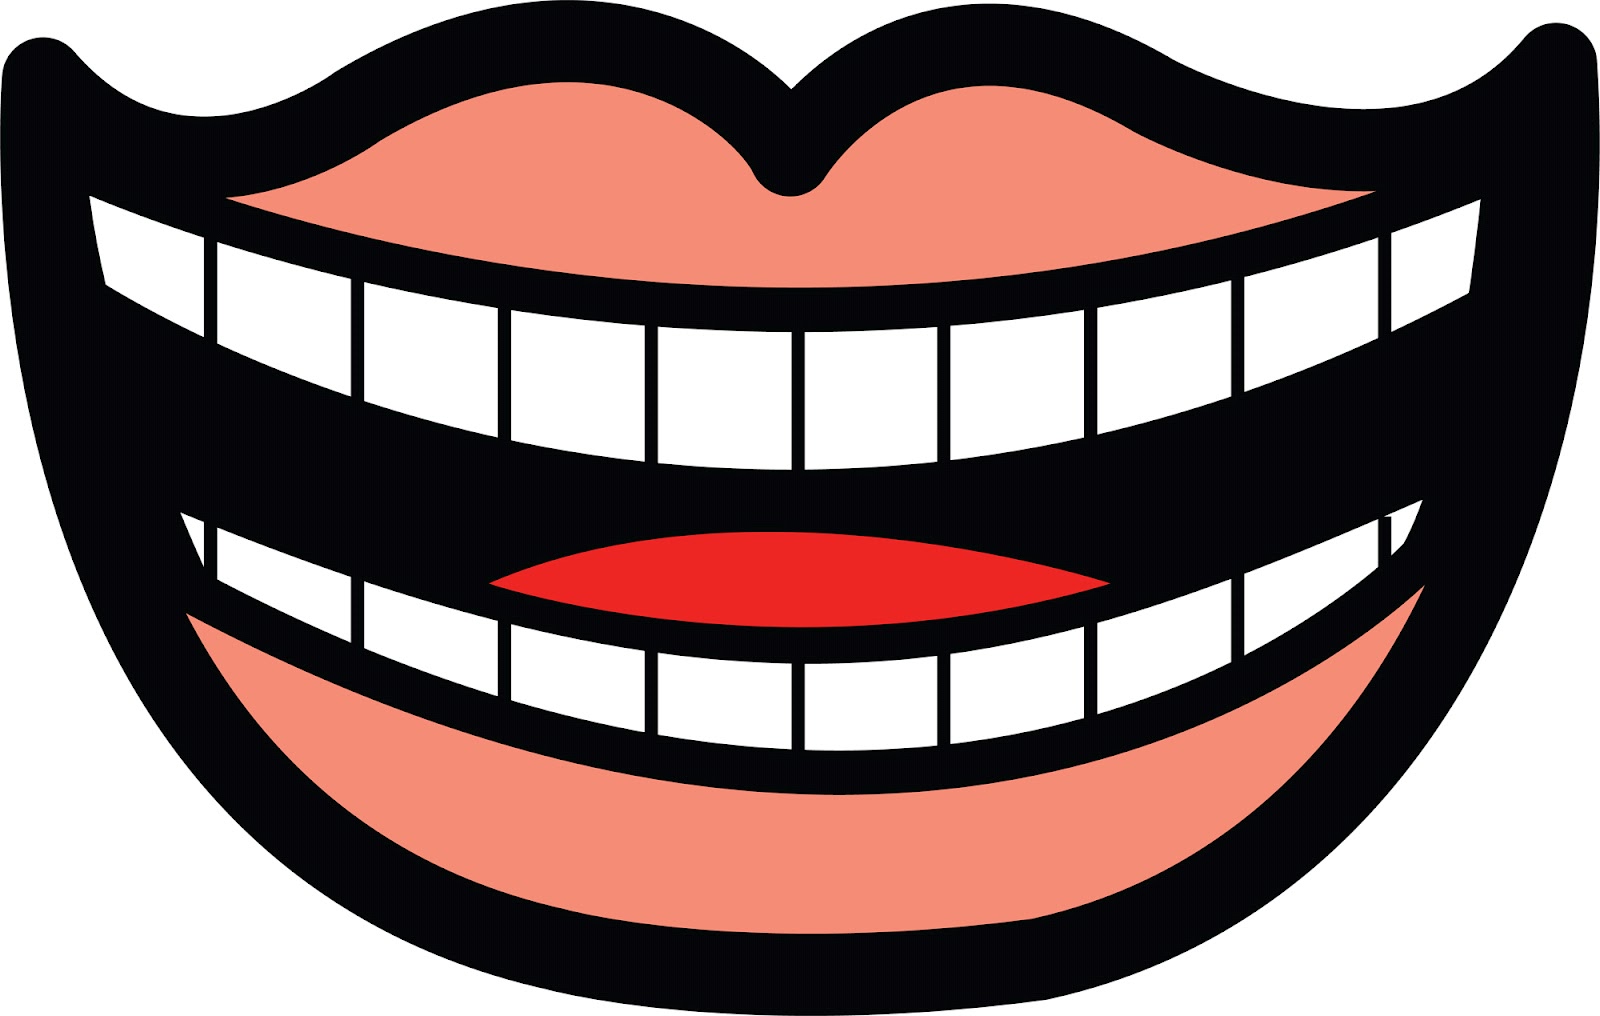 Quiet mouth clip art free cli - Mouth Clipart